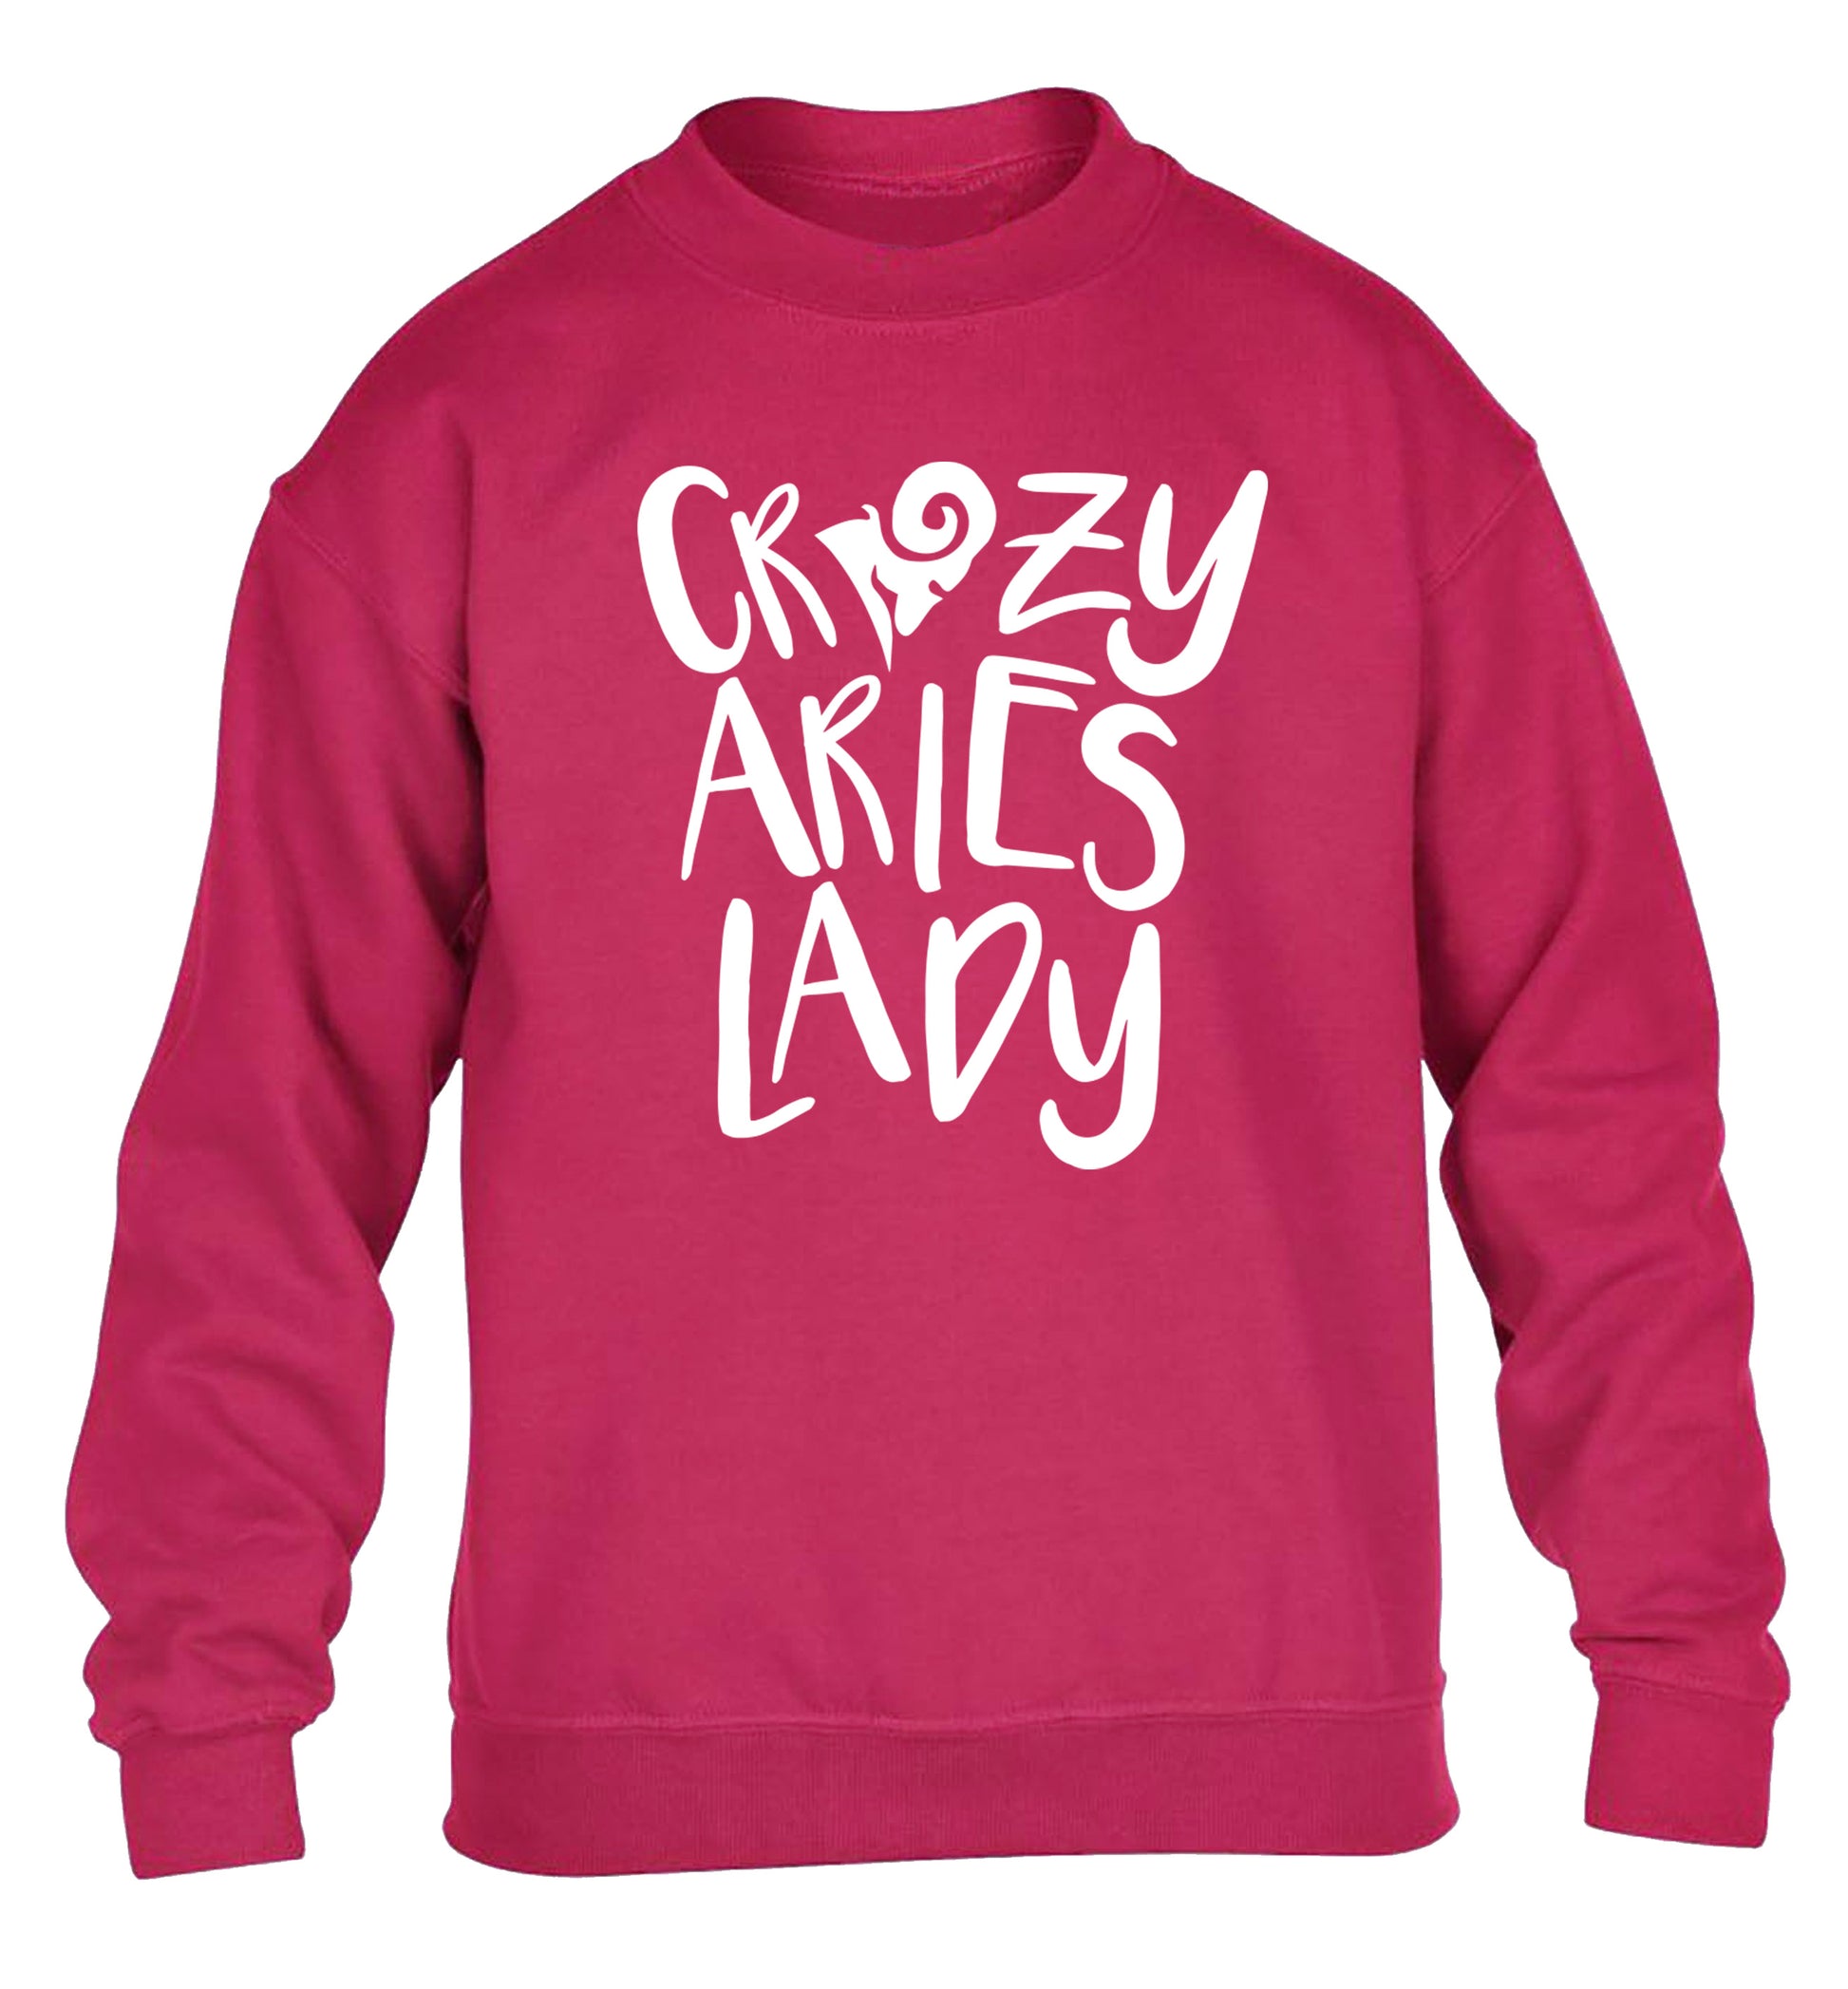 Crazy aries lady children's pink sweater 12-13 Years